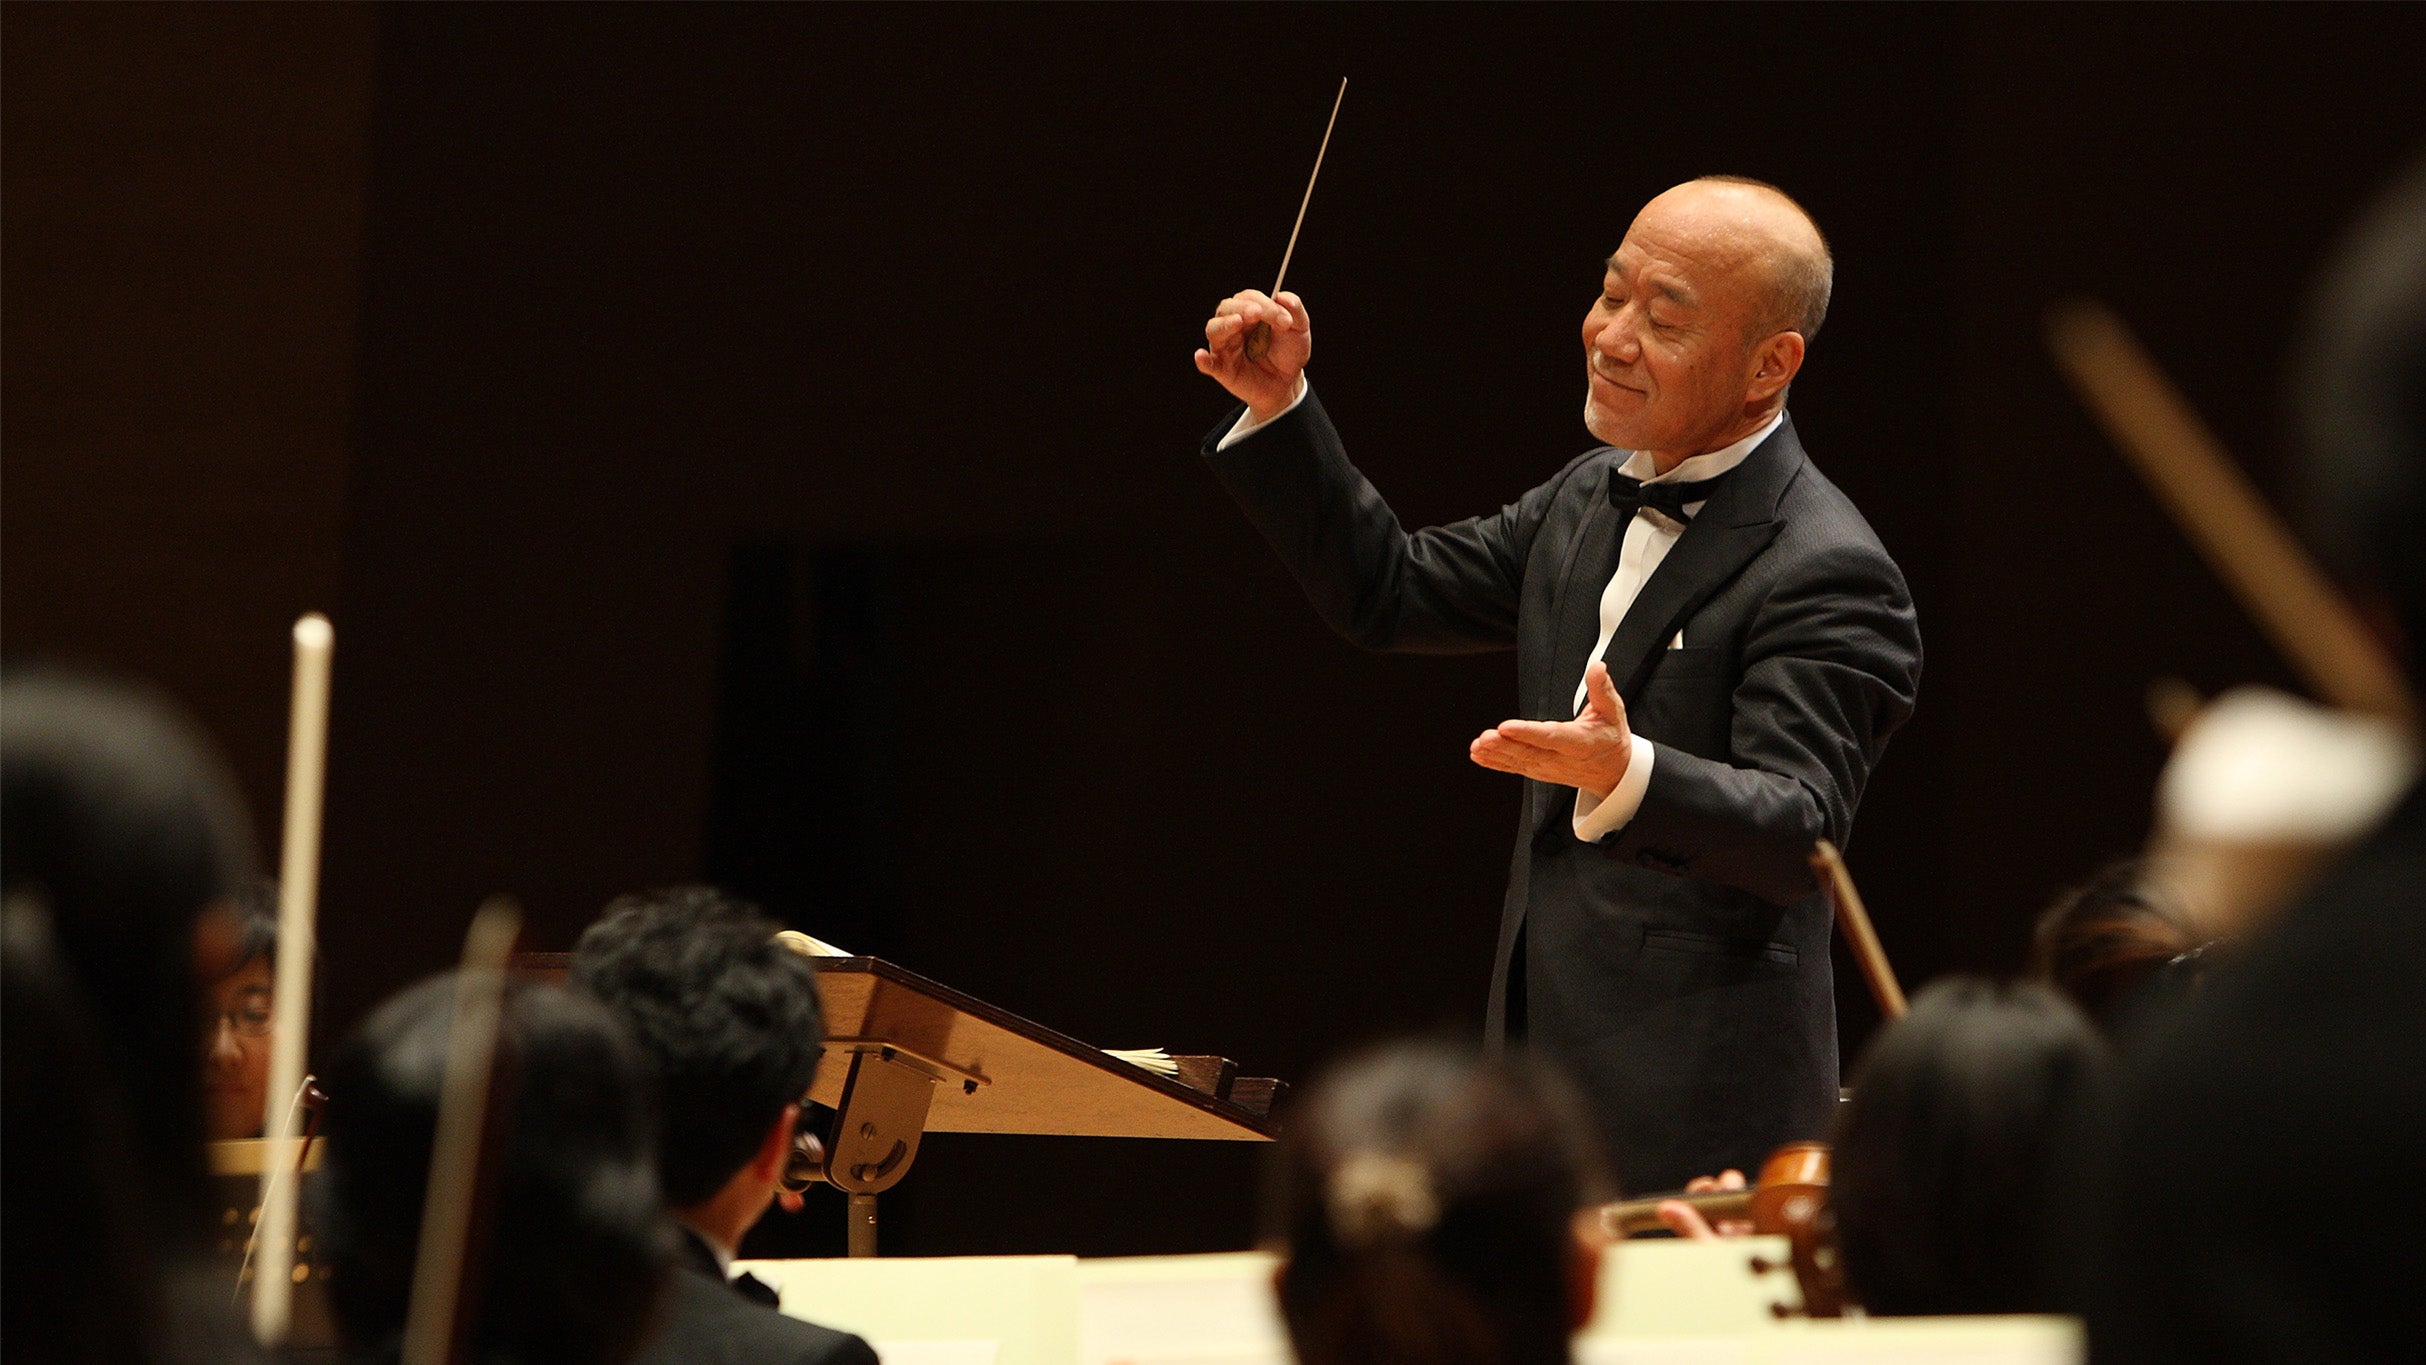 Joe Hisaishi Symphonic Concert: Music From the Studio Ghibli Films in New York promo photo for Past Purchaser presale offer code